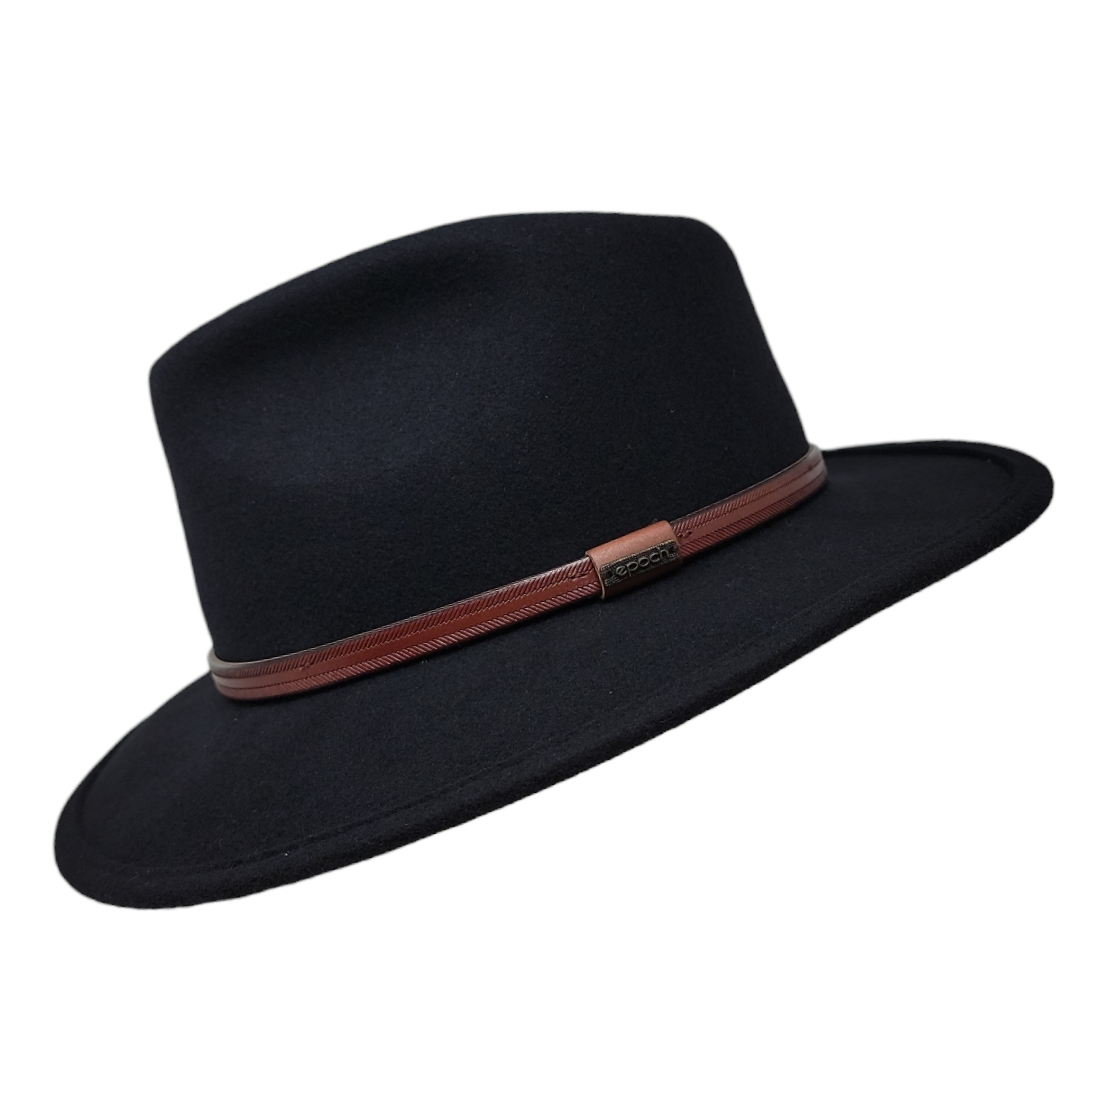 Epoch Men's Crushable Felt Outback Hat W/Leather Band